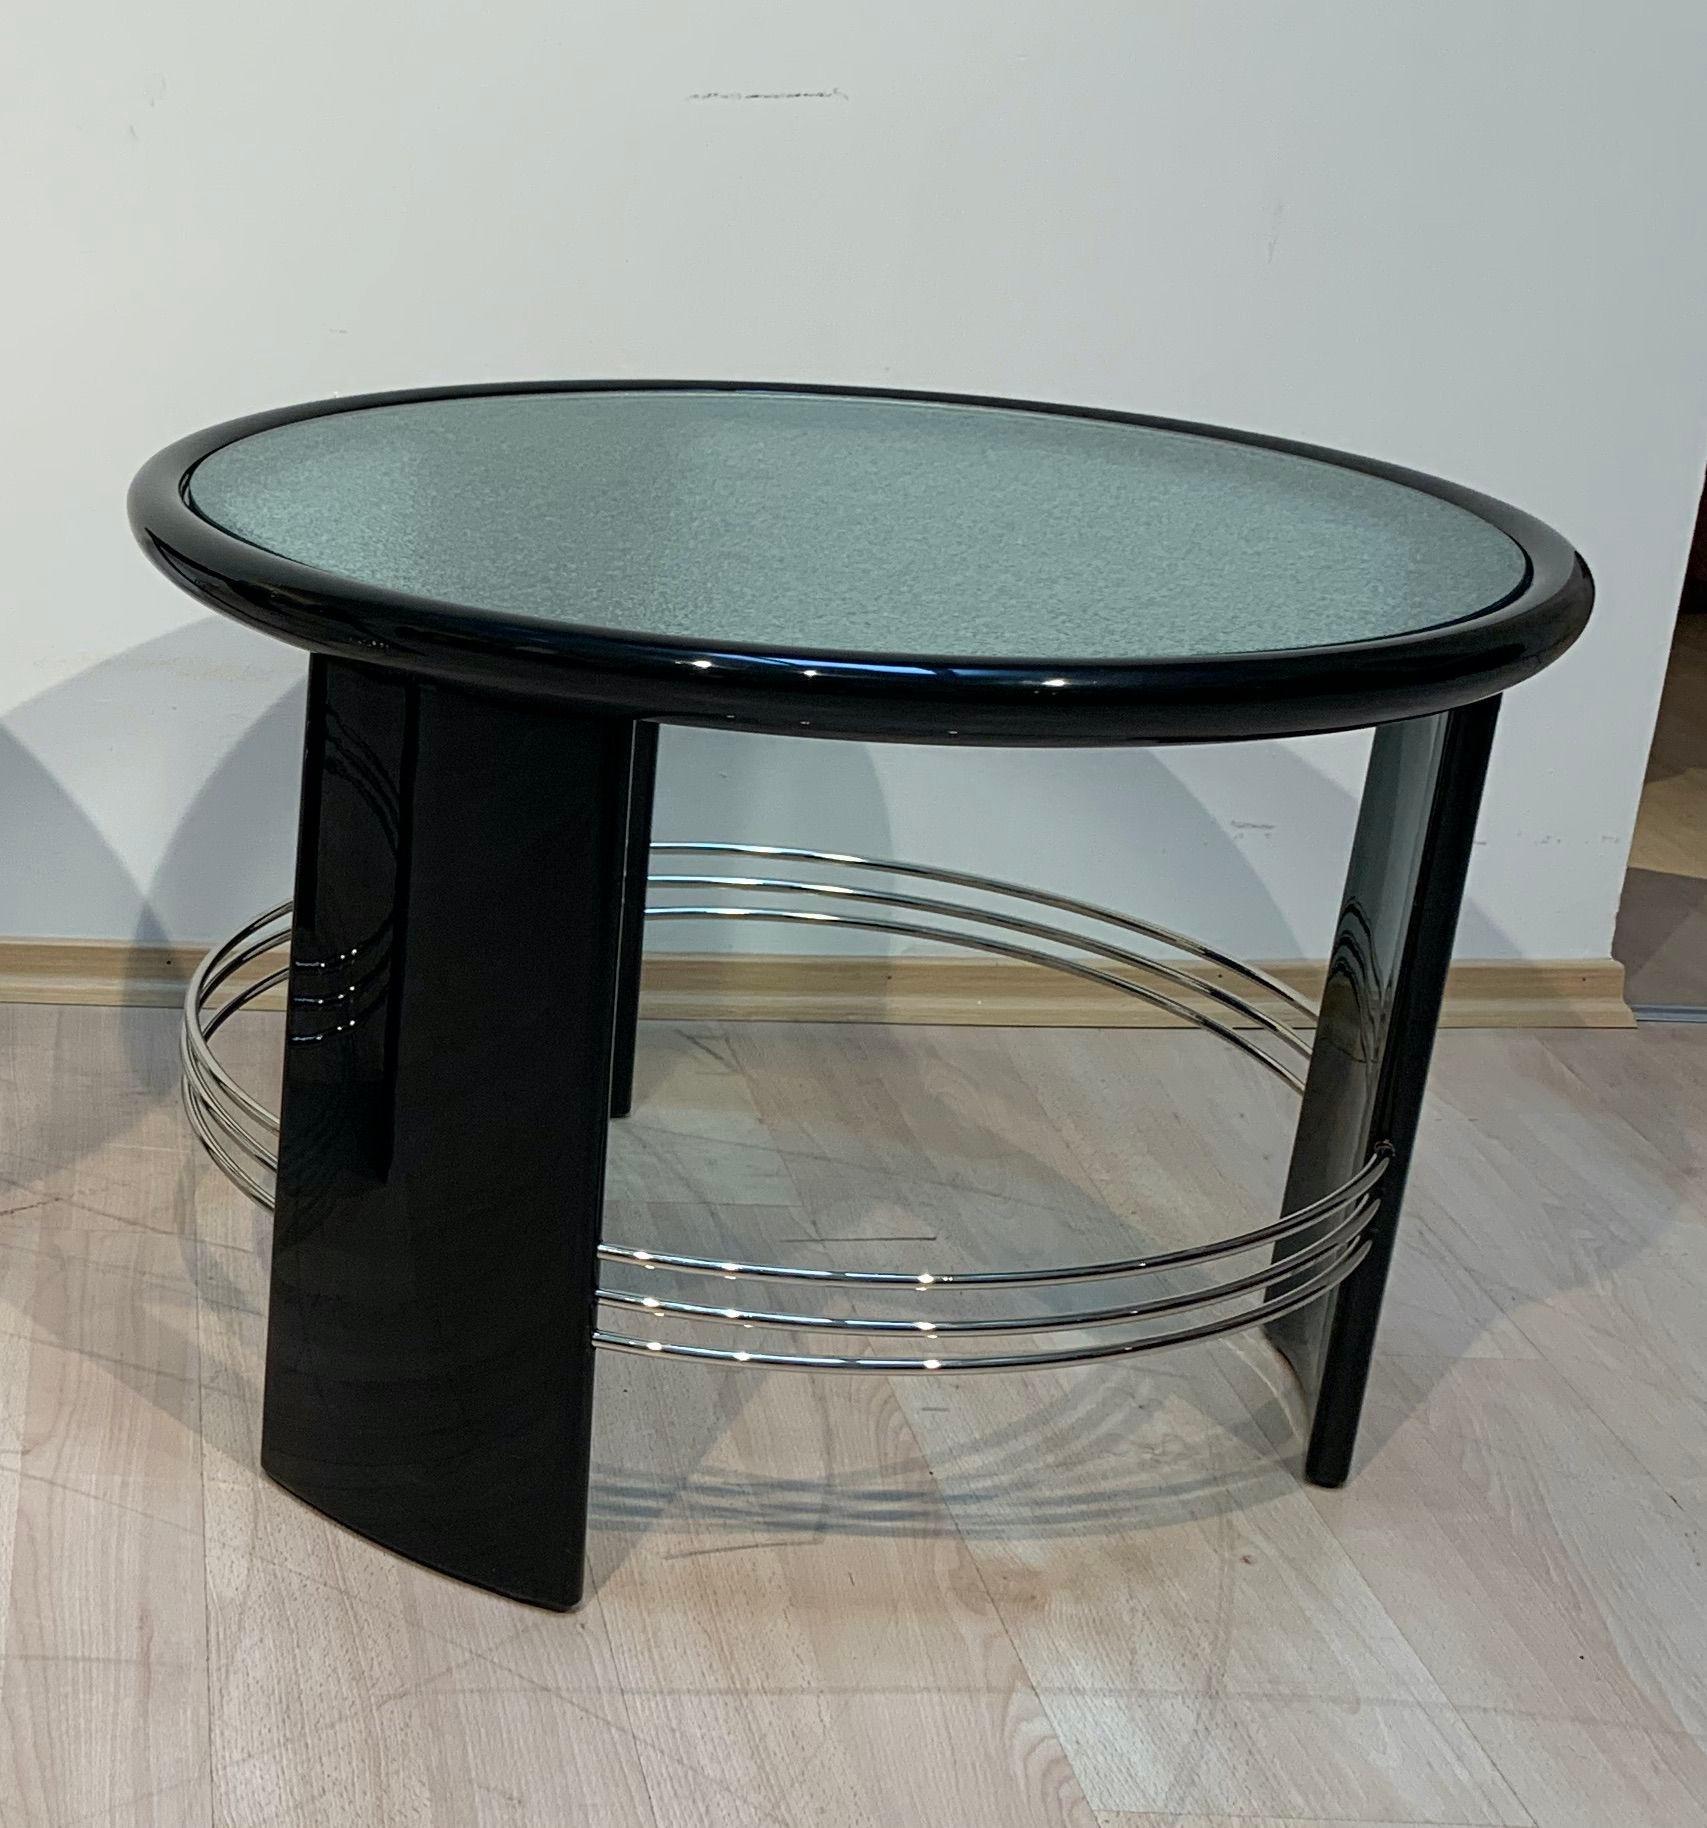 Art Deco Round Coffee Table, Black Lacquer, Chrome, Glass, France circa 1930 For Sale 1